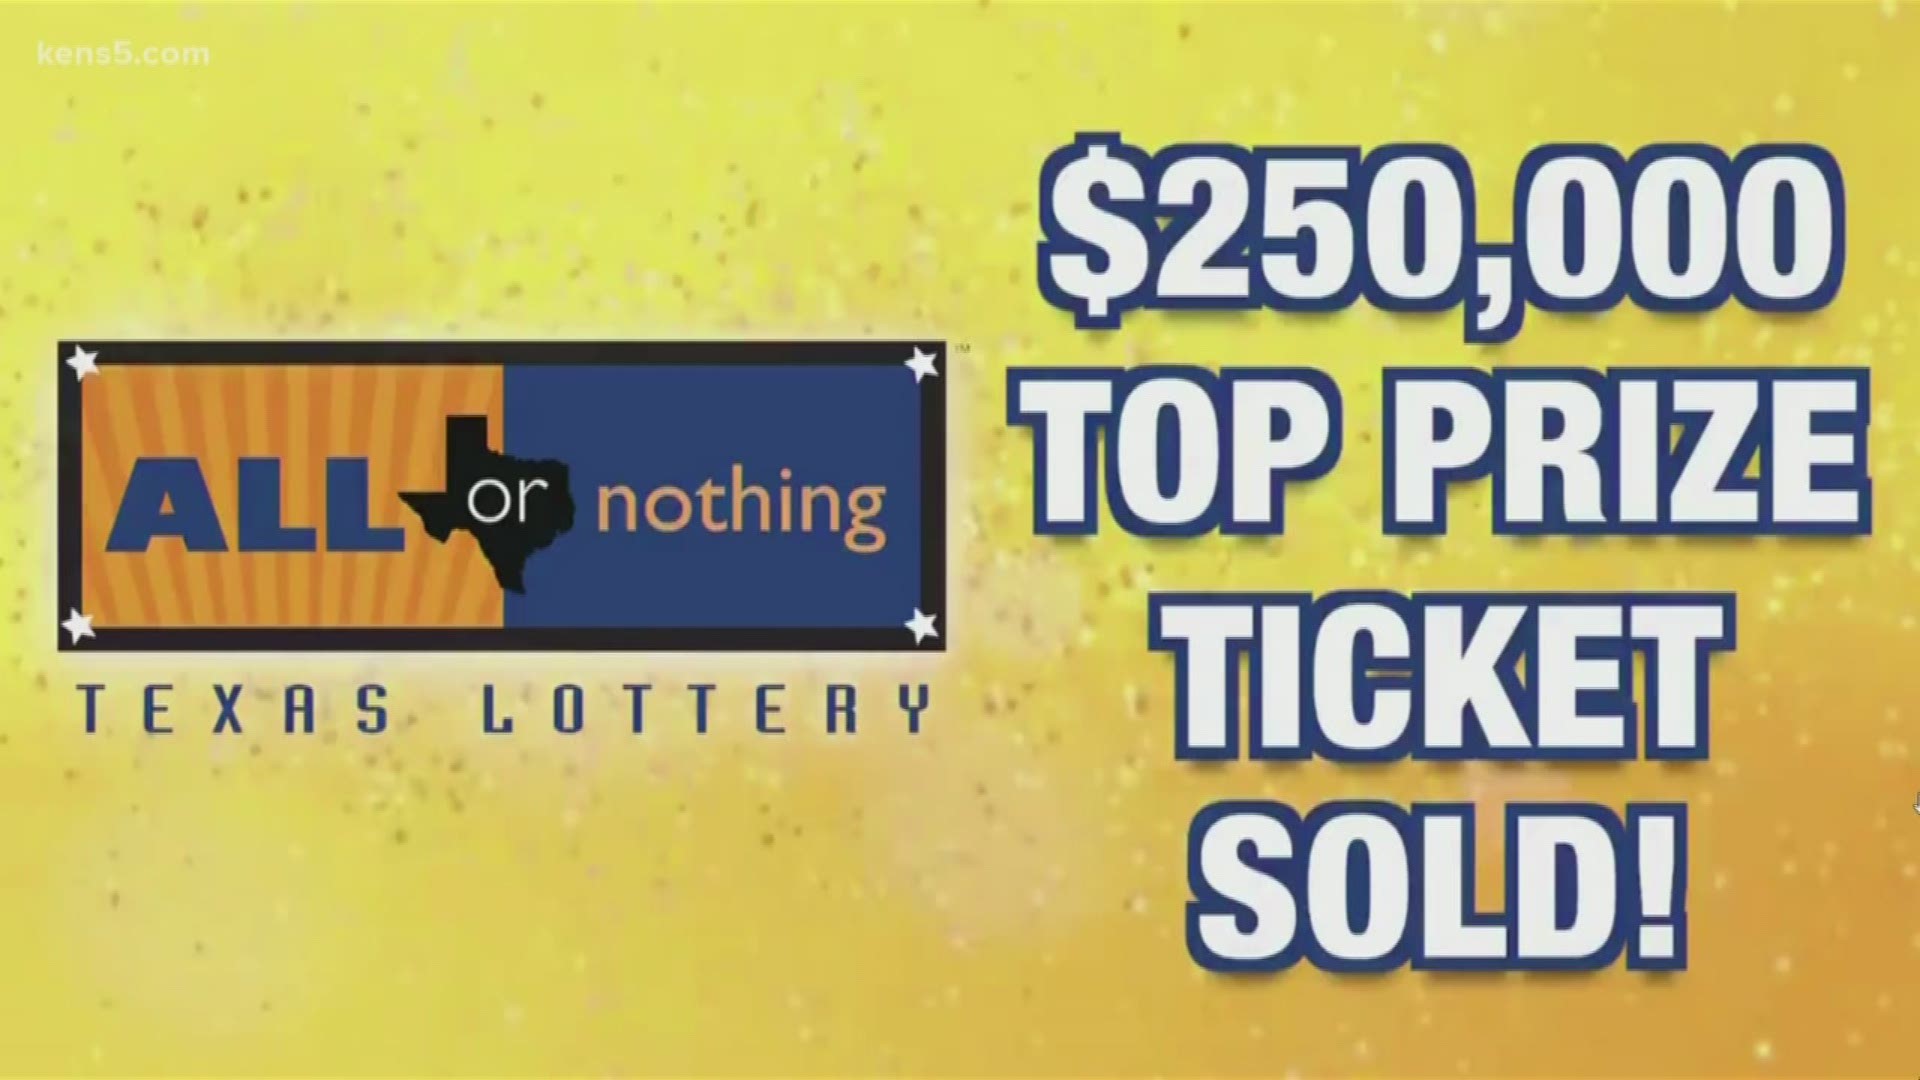 Someone has a new lucky place. The Texas Lottery announced Tuesday that a $250,000 winning ticket for the Evening All or Nothing drawing was sold in Cibolo.

We don’t yet know which store or the identity of the winner.

The winning numbers were 1 - 2 - 3 - 7 - 8 - 10 - 11 - 12 - 14 - 16 - 19 – 24.